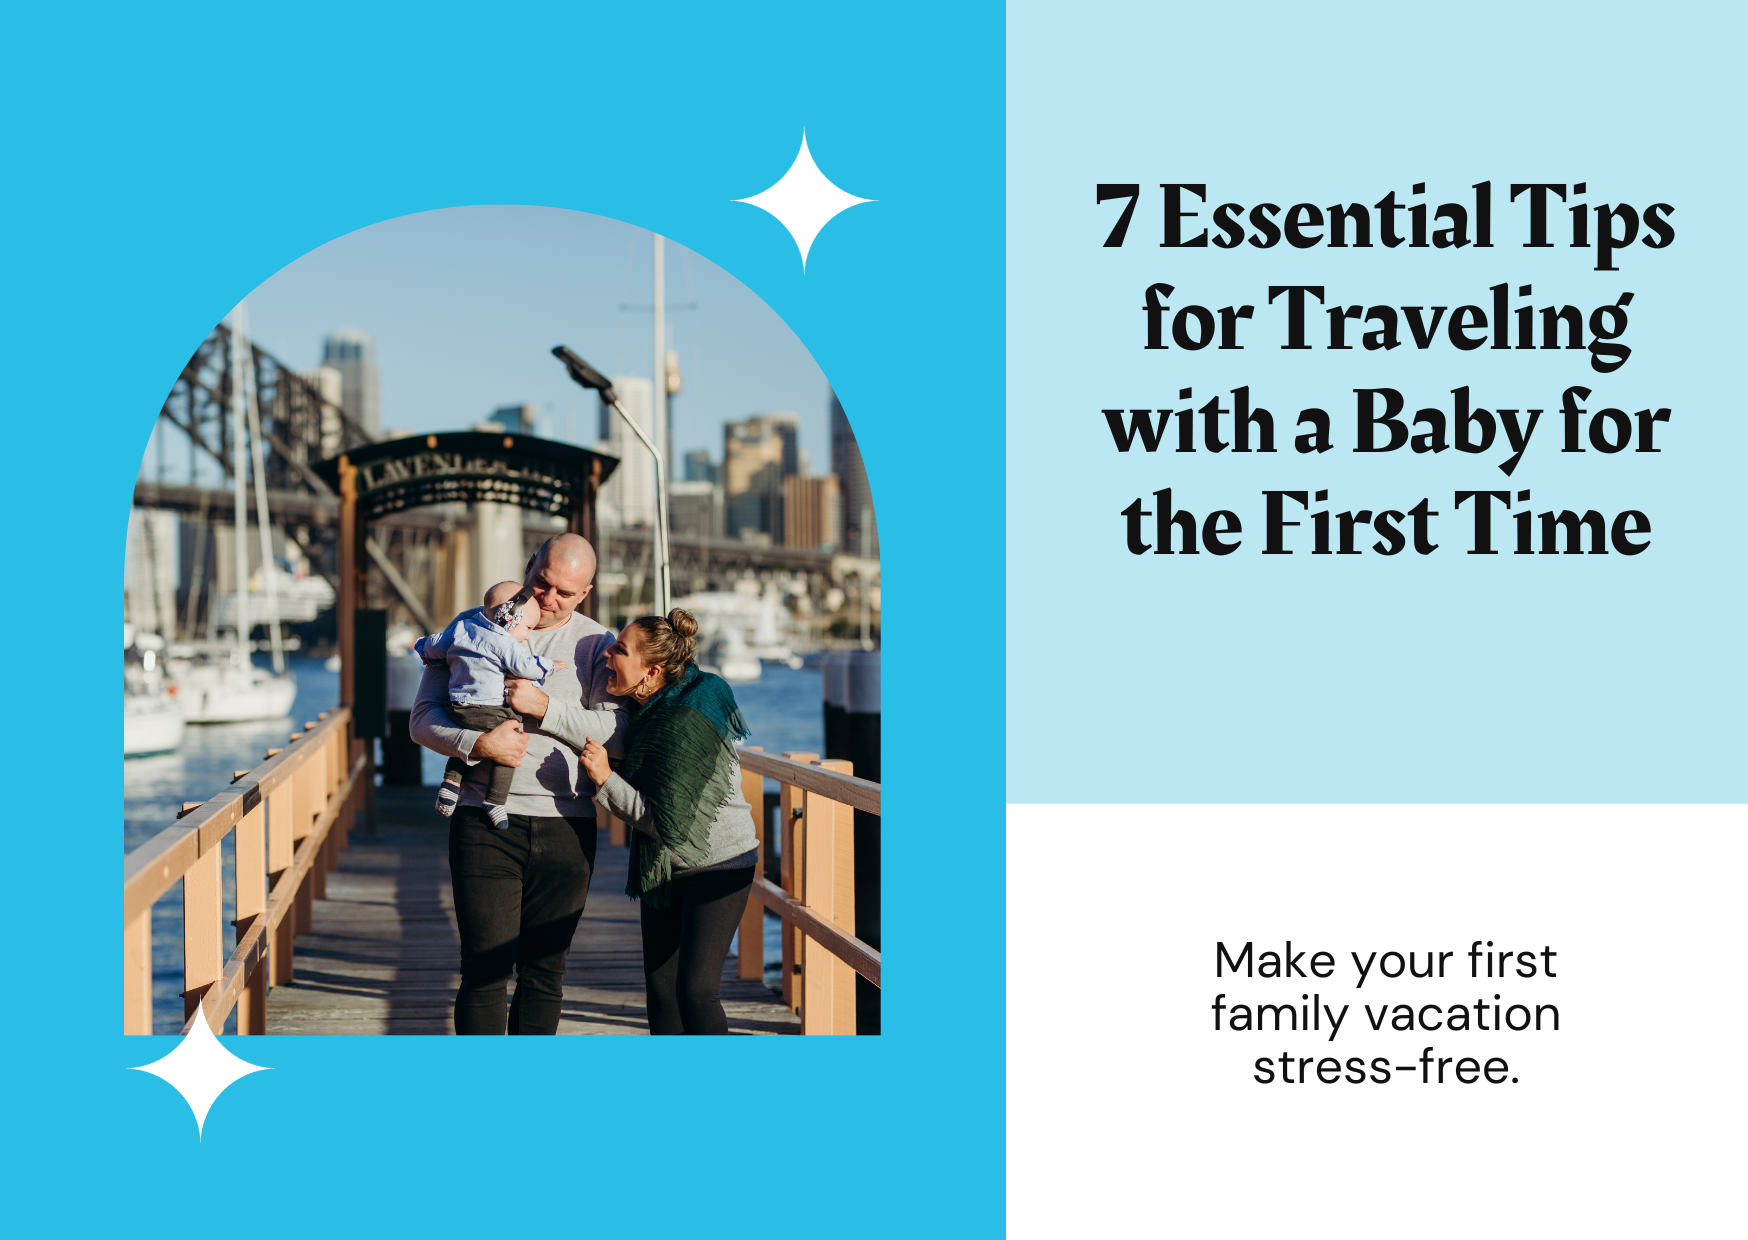 7 Essential Tips for Traveling with a Baby for the First Time